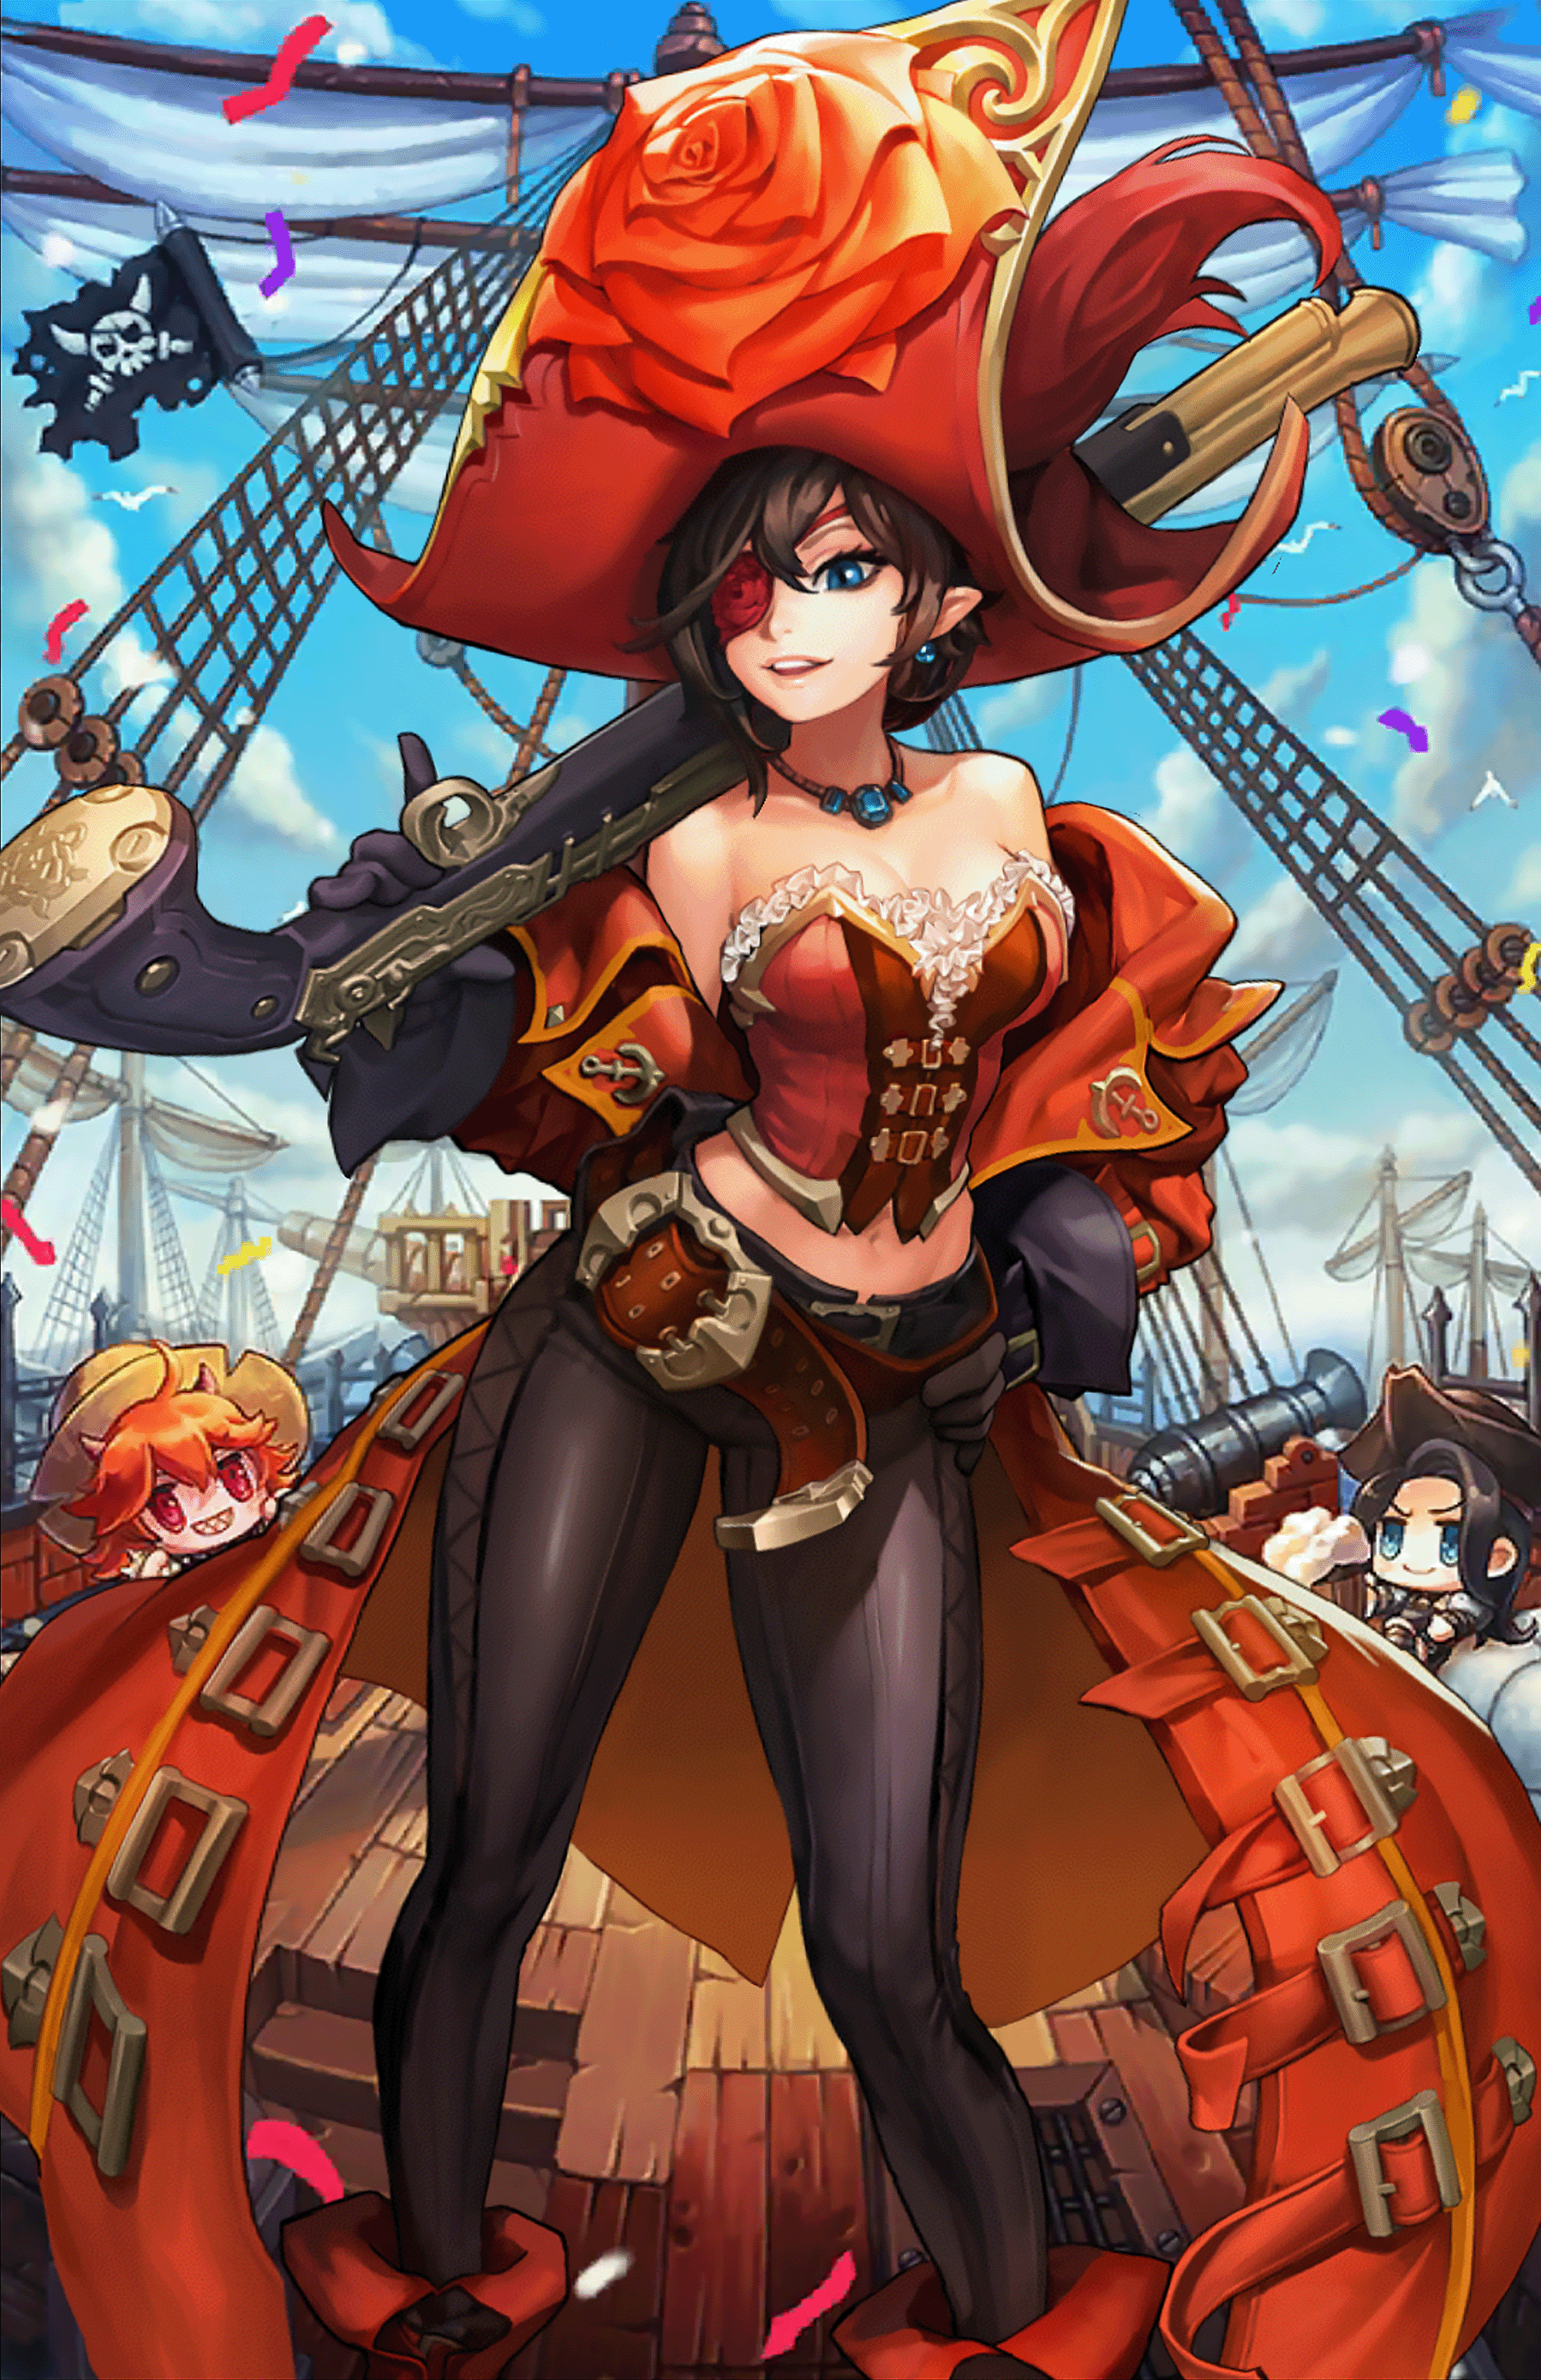 Anime 1799x2778 Guardian Tales Rachel (Guardian Tales) pirate hat pirate girl blue eyes big gun Pirate ship Pirate Flag anime girls anime PC gaming girls with guns pirates fantasy art fantasy girl video game girls weapon eyepatches video game characters